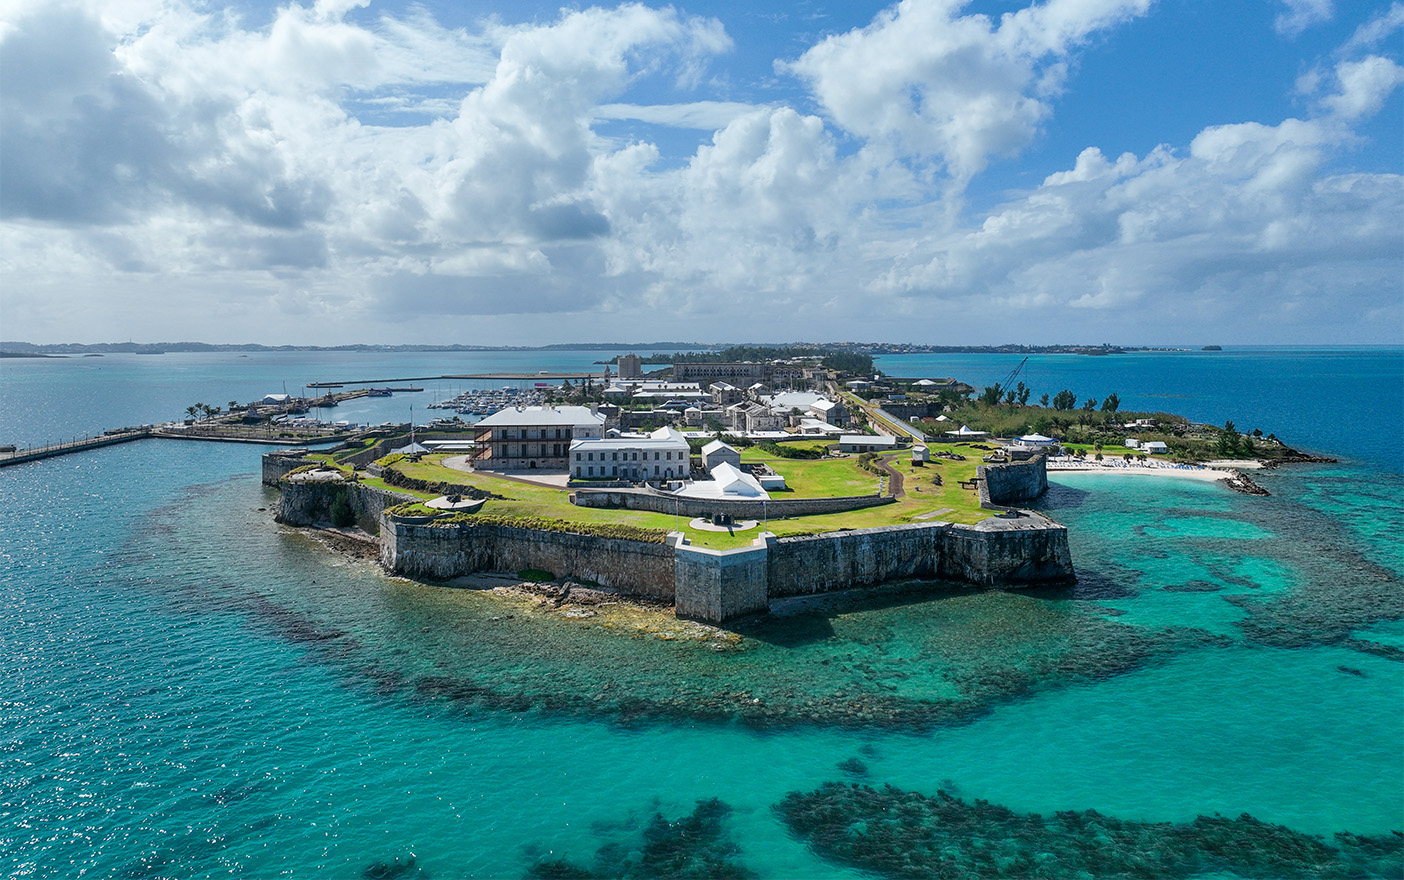 Aerial view of beautiful blue water surrounding the island on which the National Museum of Bermuda sits.